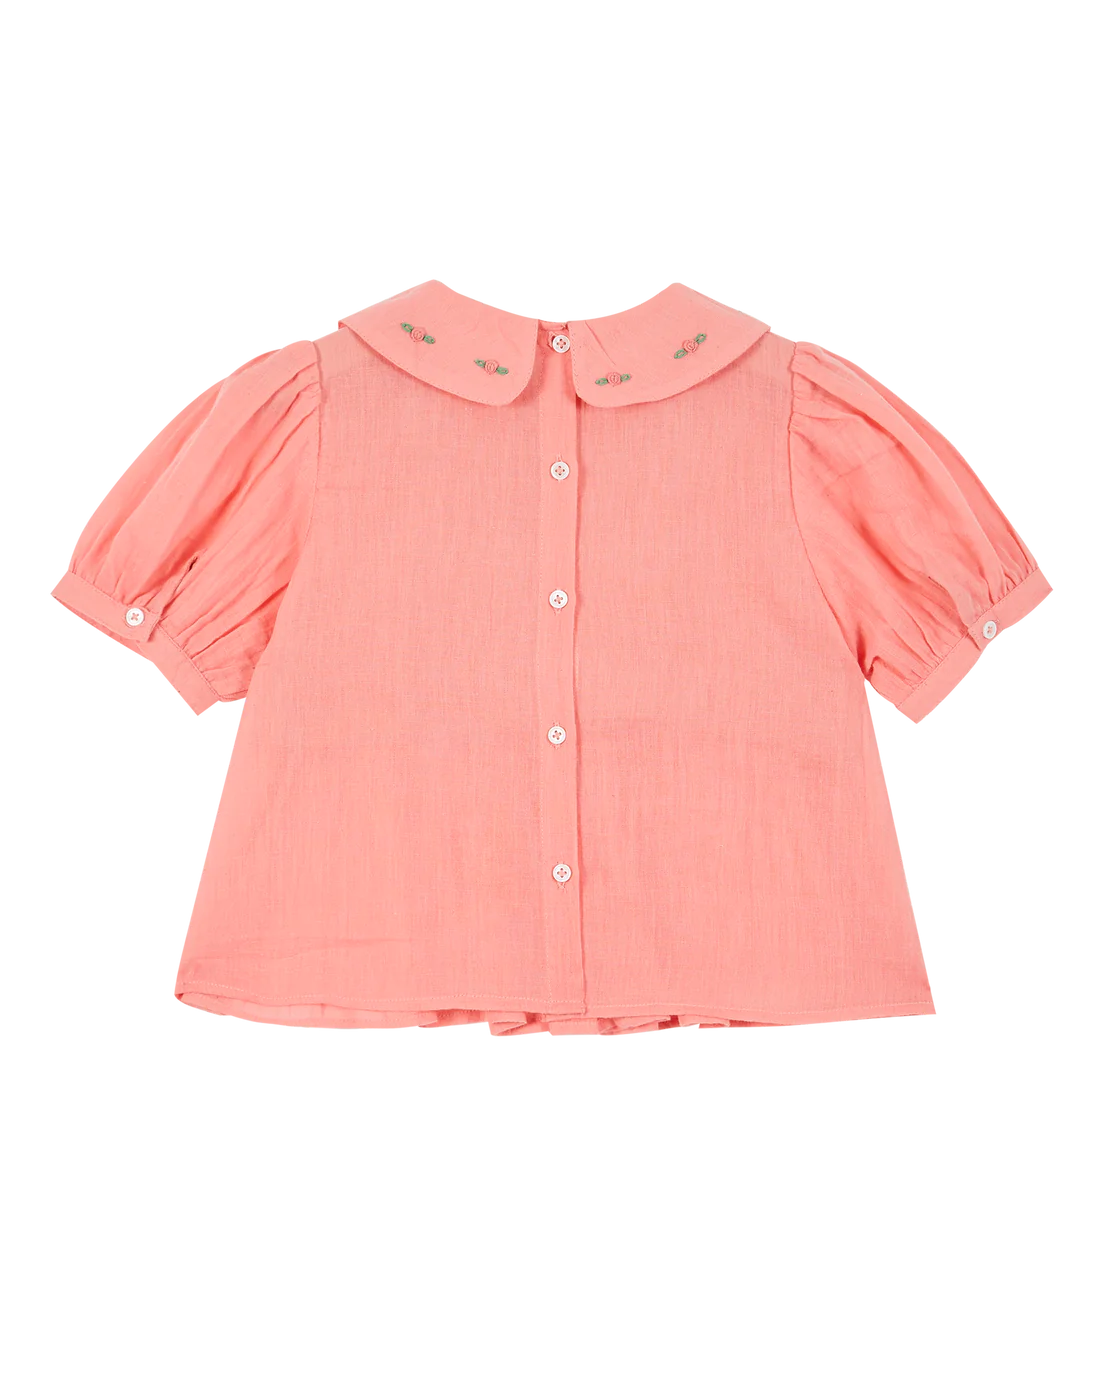 Embroidered Collar Smocked Cotton Blouse | Pink